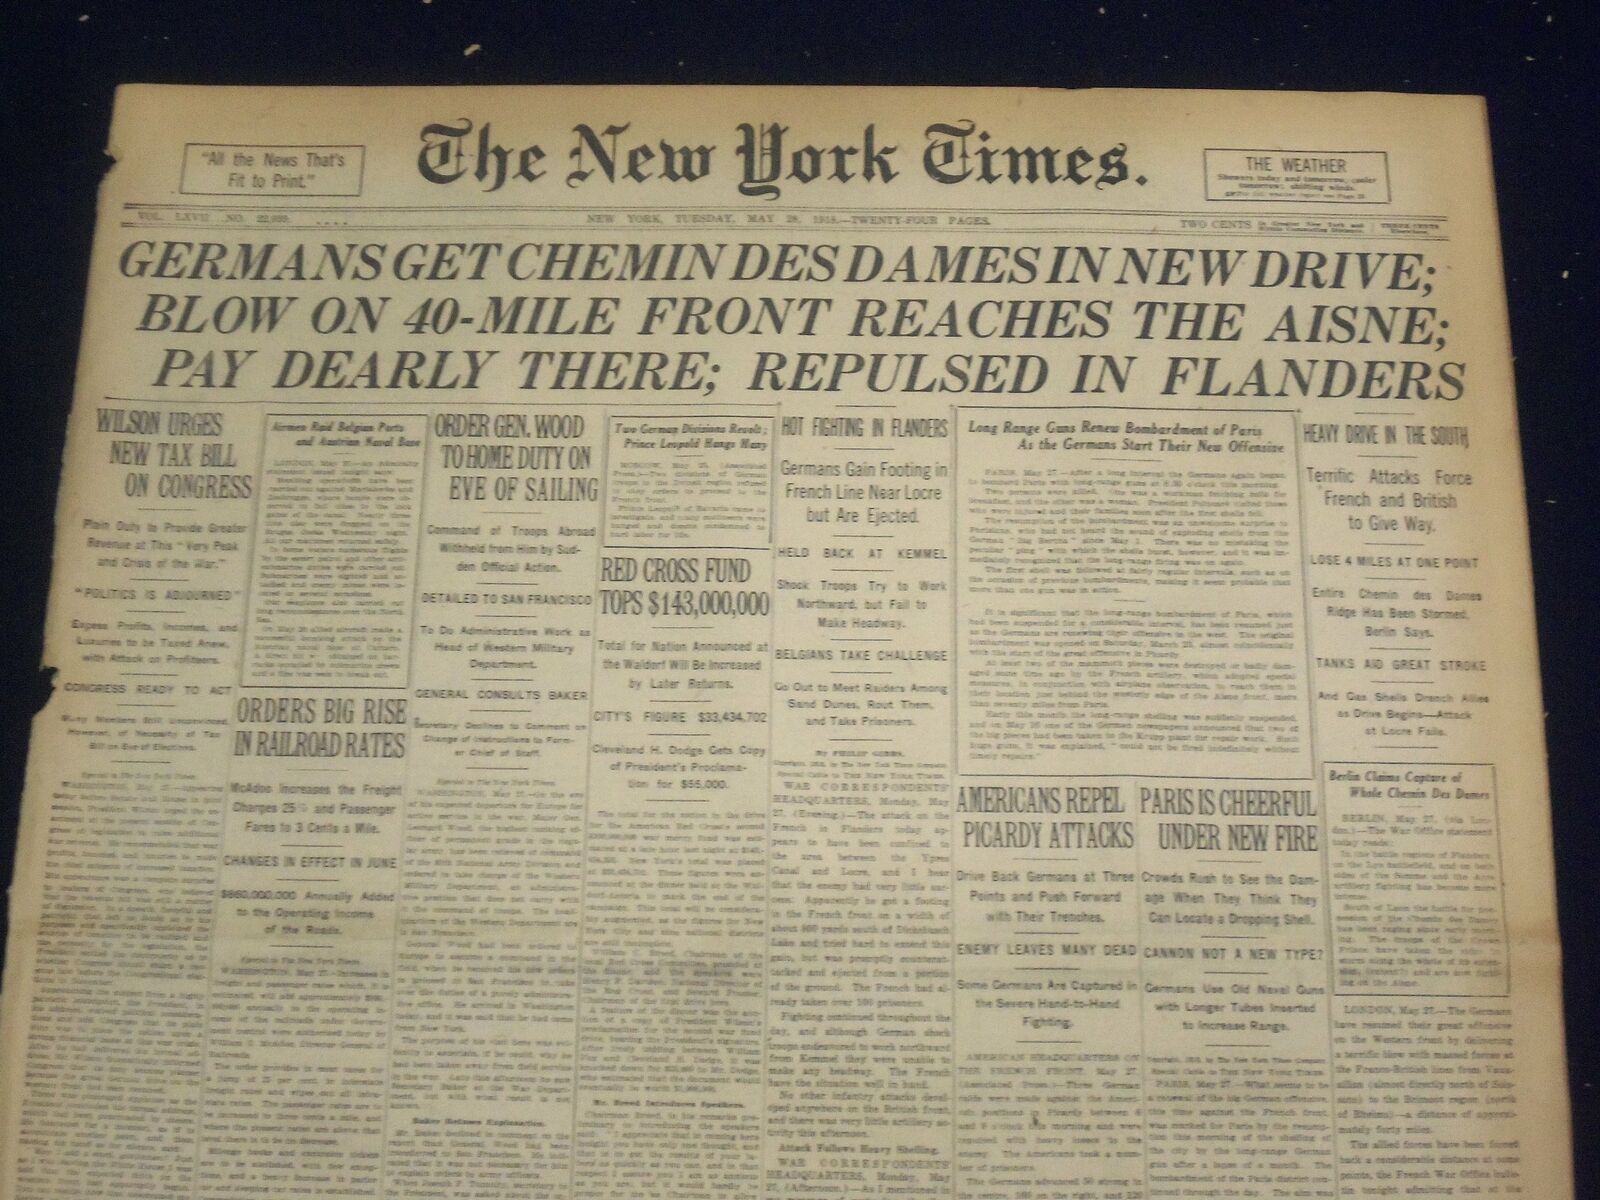 1918 MAY 28 NEW YORK TIMES - GERMANS GET CHEMIN DES DAMES - NT 8186